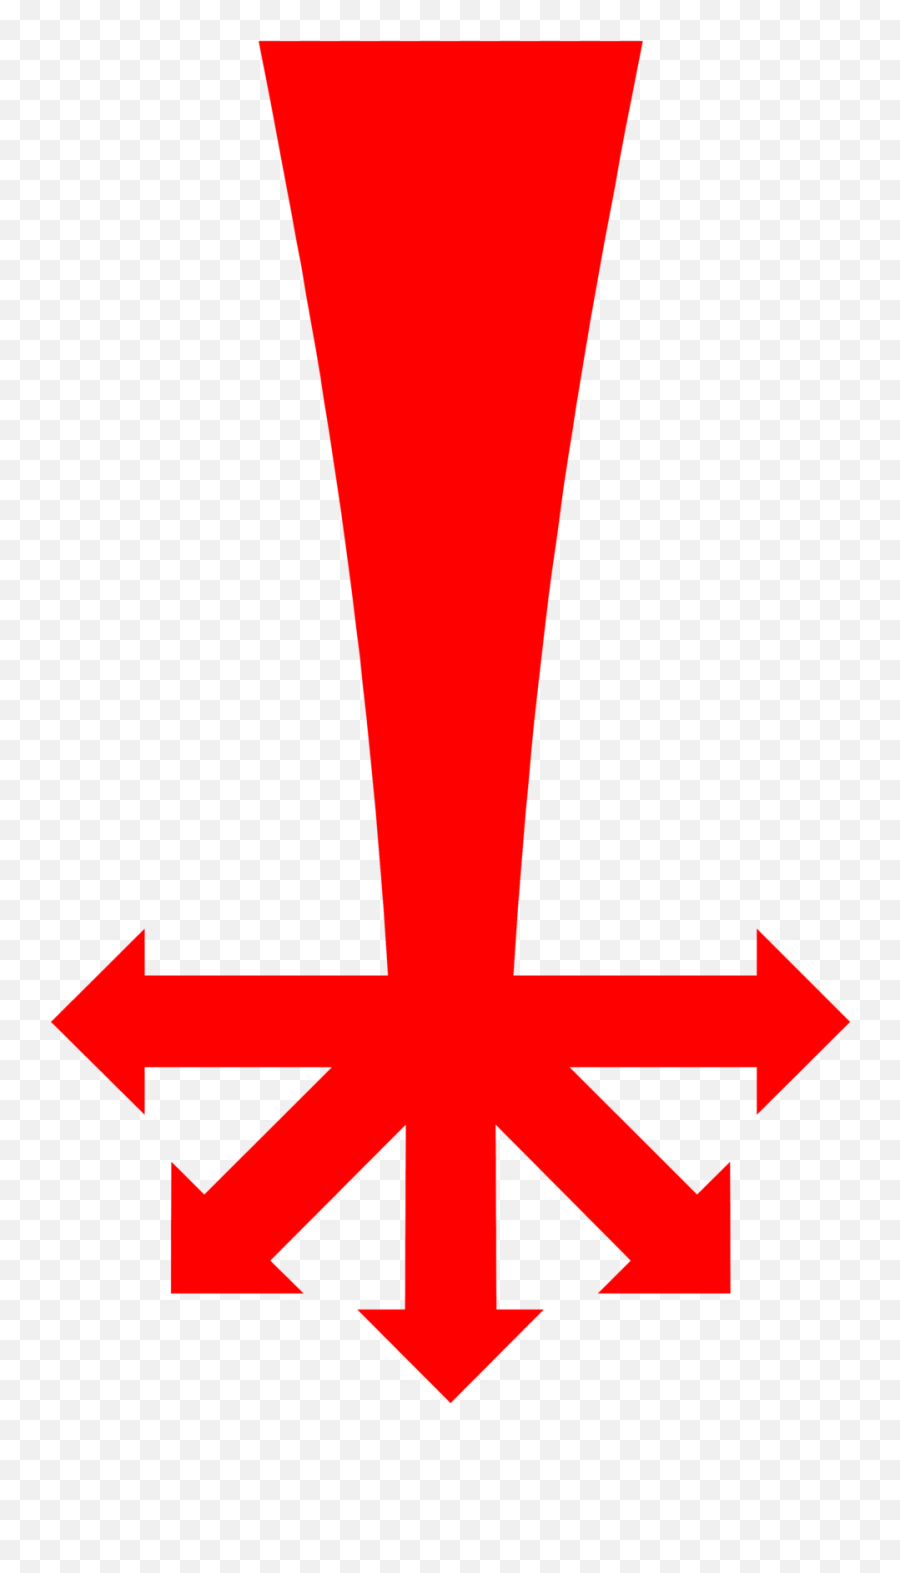 Curved Red Arrow - Arrows All Directions Transparent Emoji,Red Arrow Png